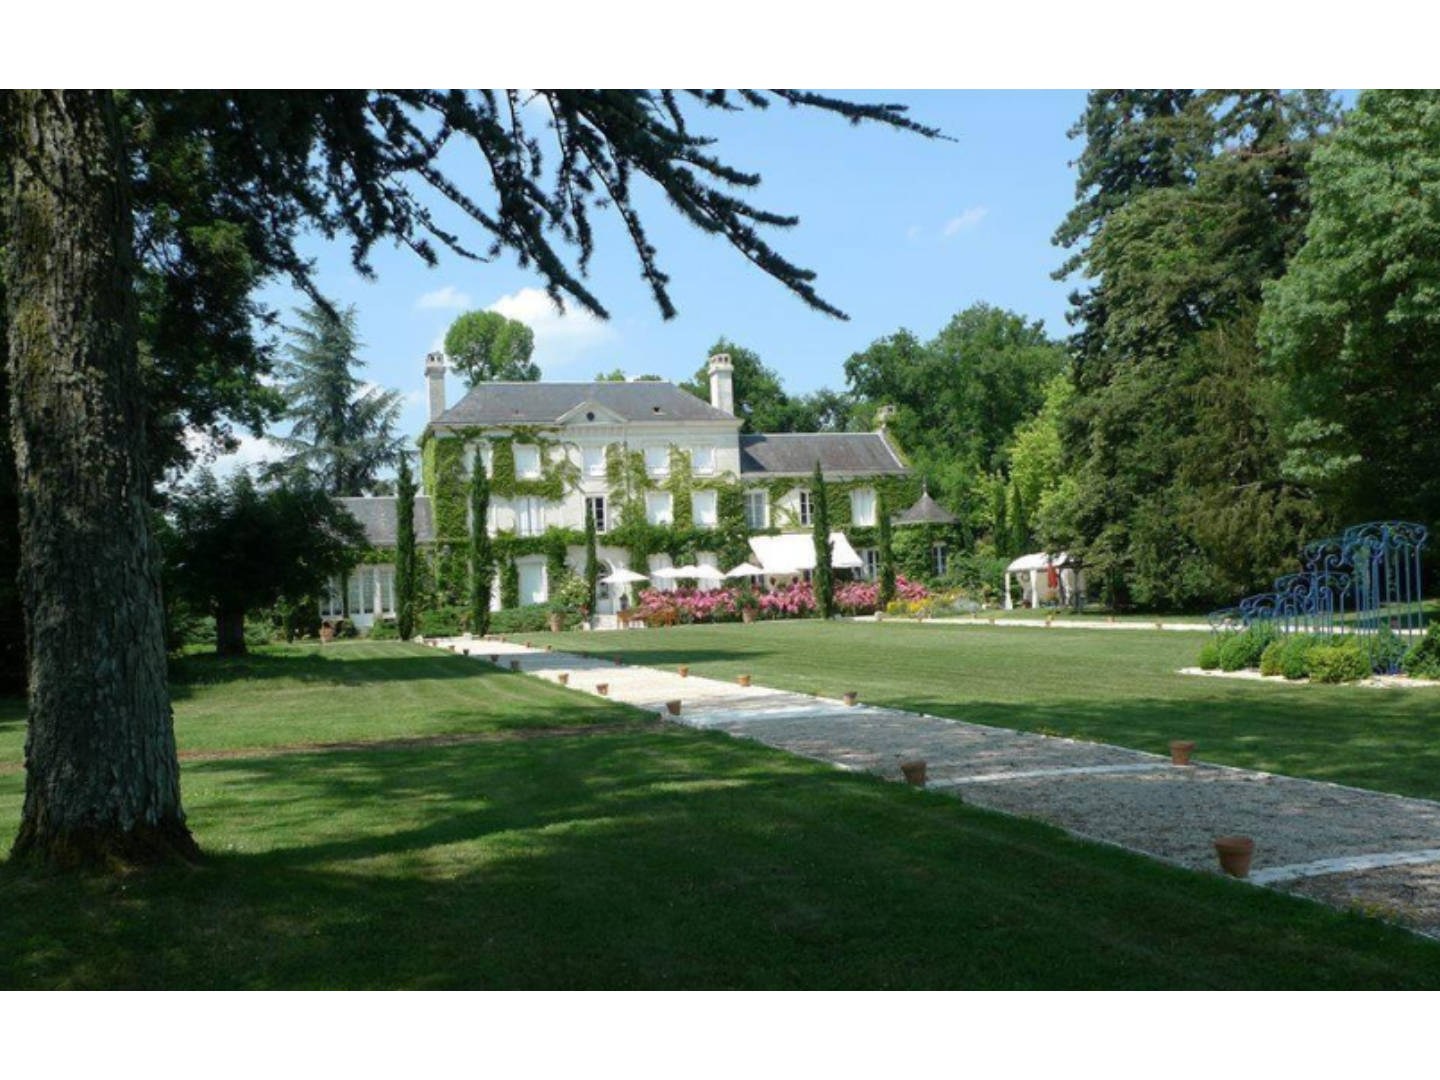 Pernay Bed and Breakfast